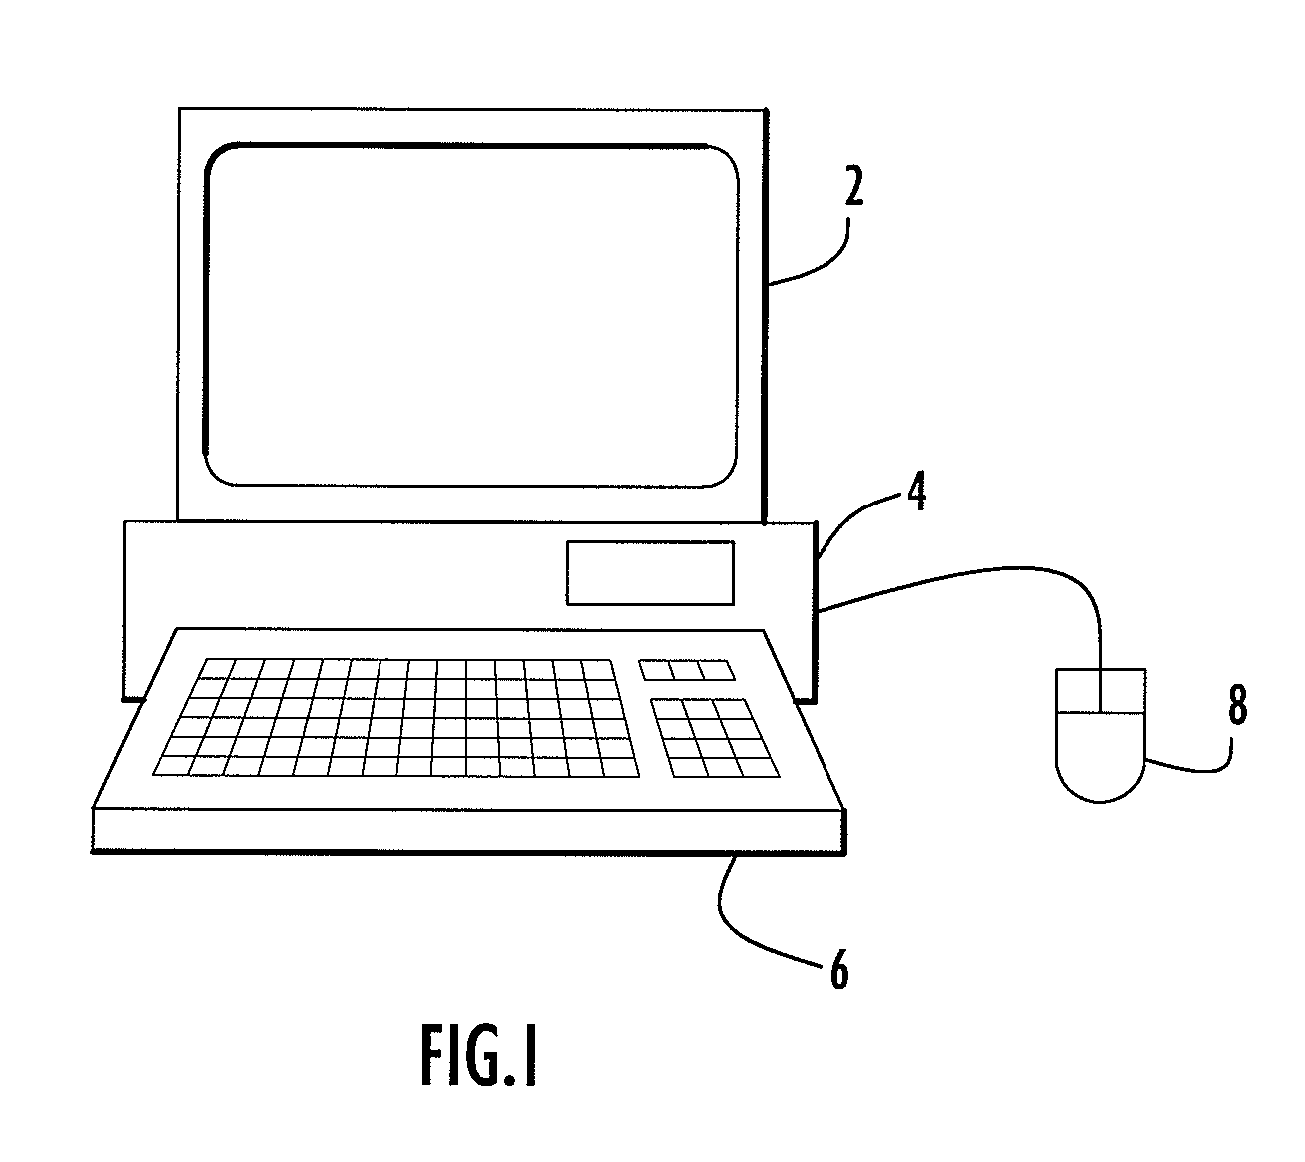 Acronym Extraction System and Method of Identifying Acronyms and Extracting Corresponding Expansions from Text